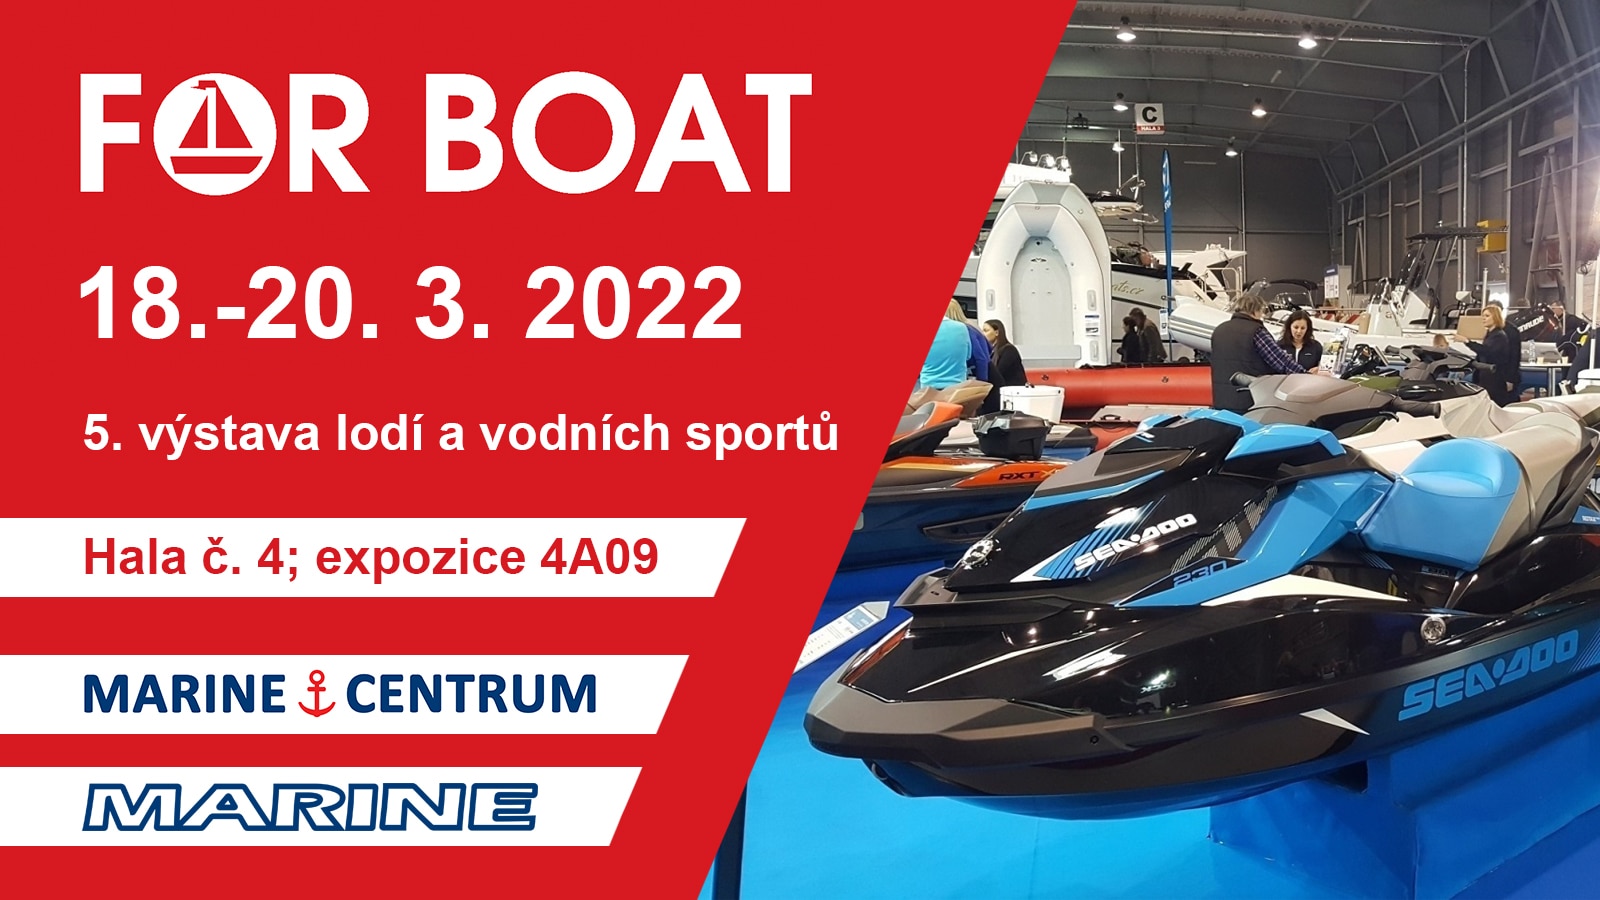 FOR BOAT 2022